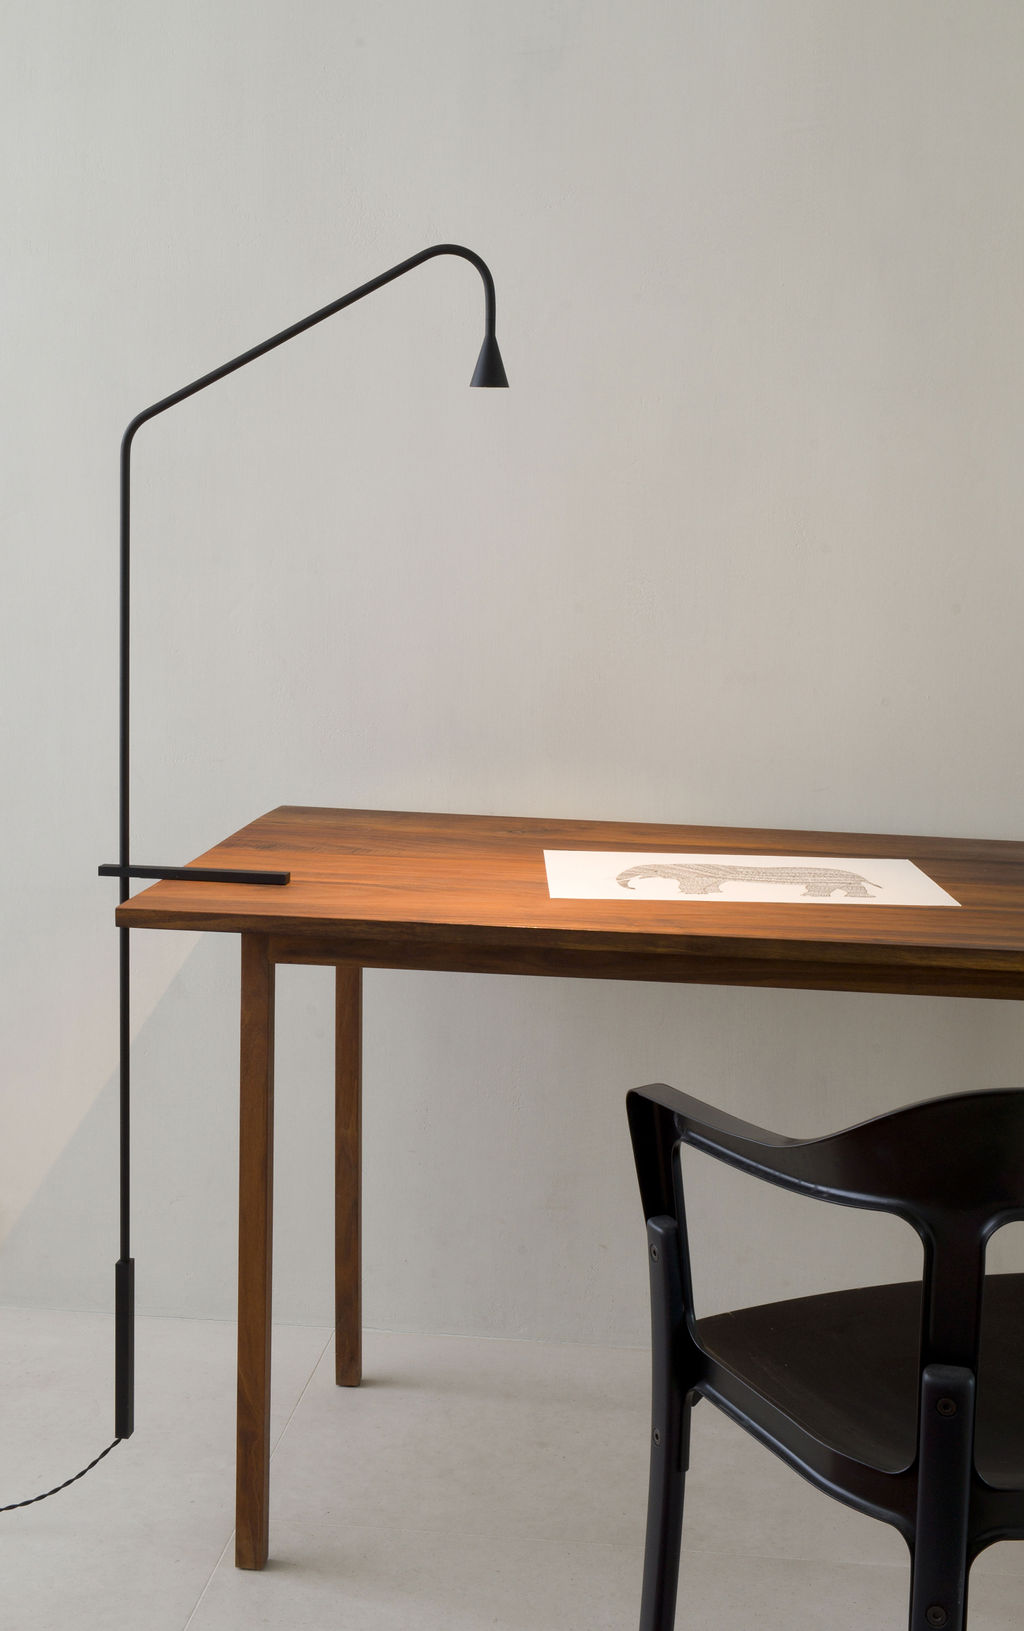 Austere Table Lamp in Gunmetal by Trizo21.